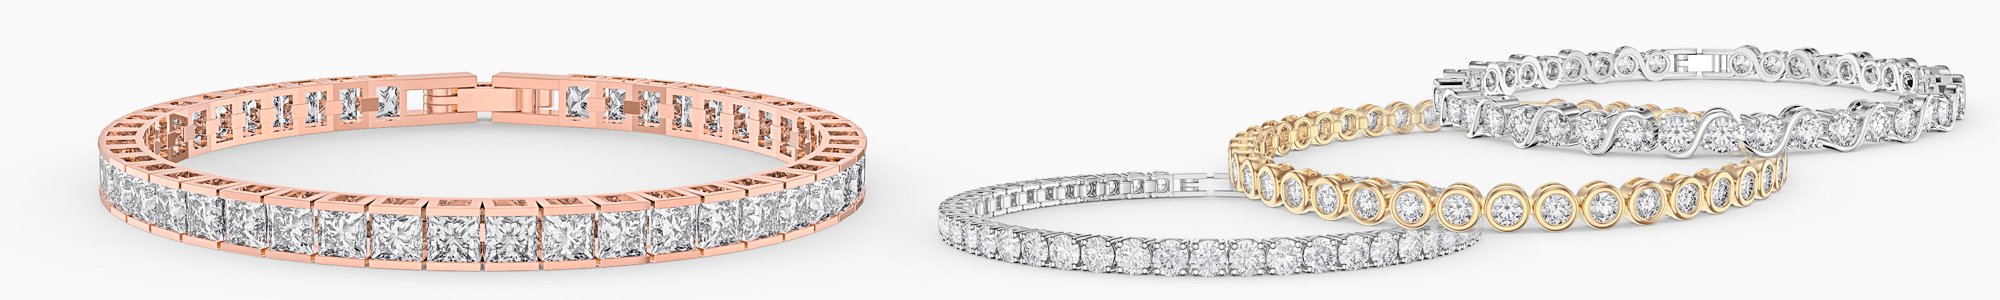 Bracelets for everyone - from precious gemstones to Diamonds. From Silver to 18K Gold.